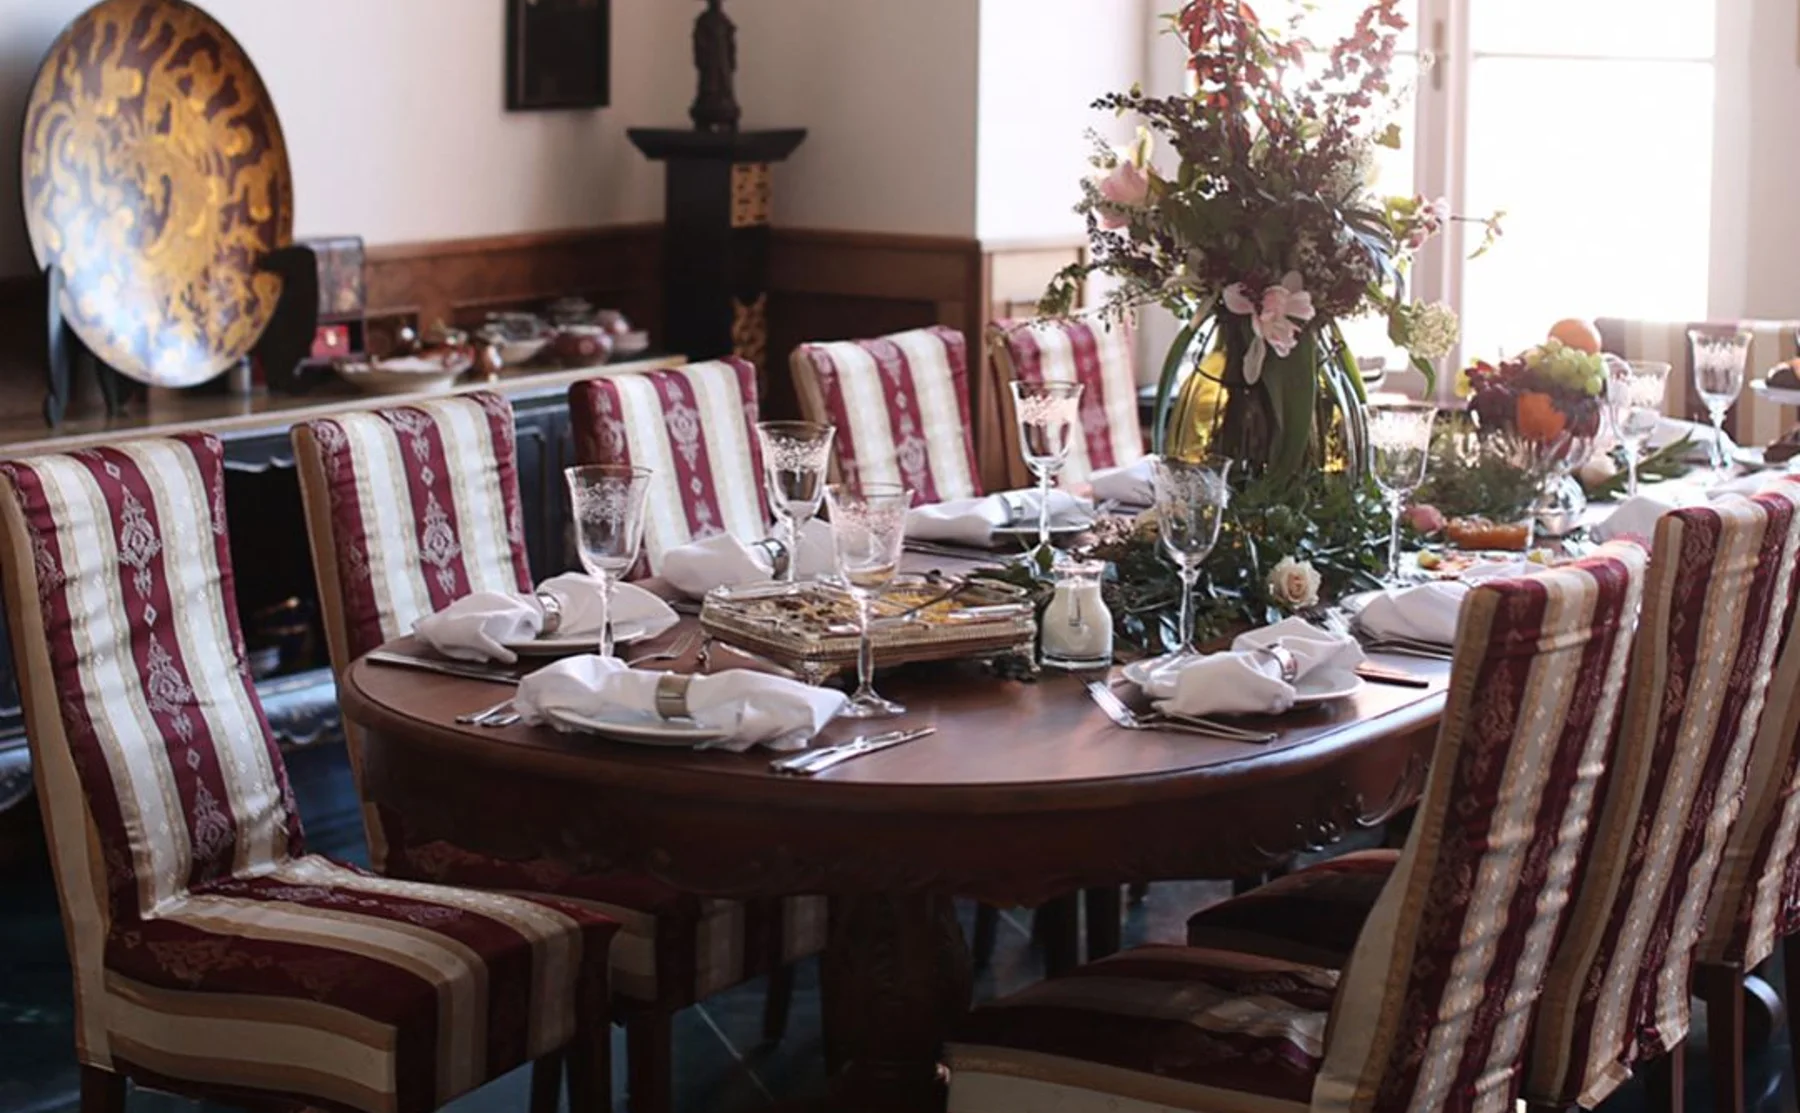 Stylish lunch in the privacy of the Savoia Castle - 455848